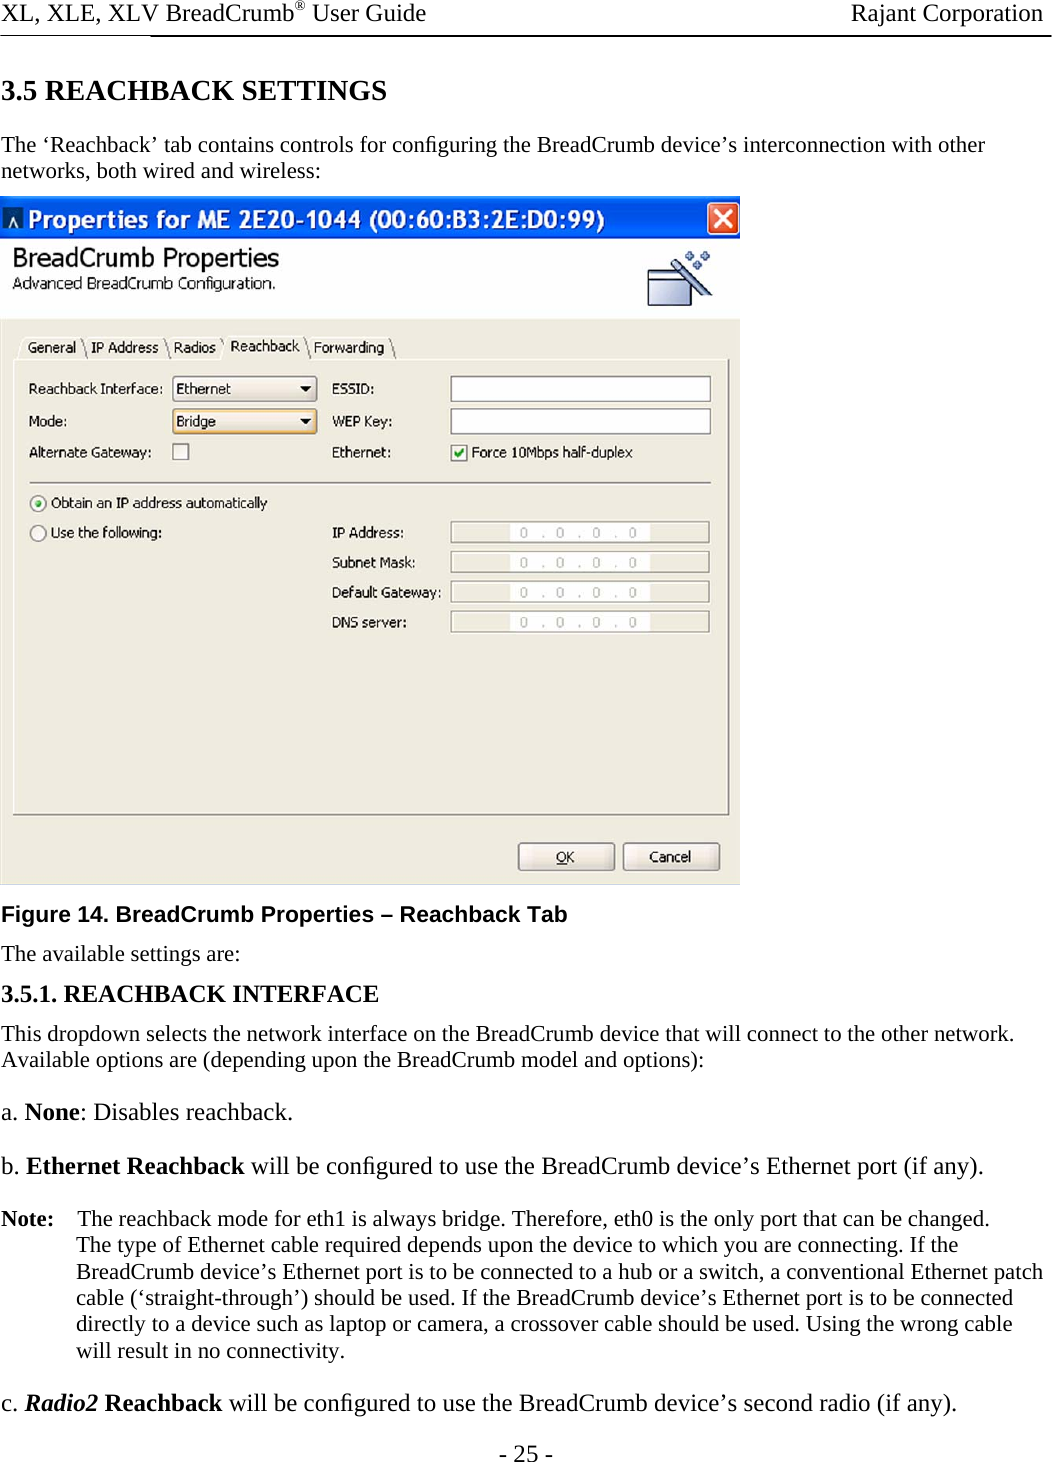 XL, XLE, XLV BreadCrumb® User Guide                Rajant Corporation 3.5 REACHBACK SETTINGS  The ‘Reachback’ tab contains controls for conﬁguring the BreadCrumb device’s interconnection with other networks, both wired and wireless:   Figure 14. BreadCrumb Properties – Reachback Tab The available settings are:  3.5.1. REACHBACK INTERFACE  This dropdown selects the network interface on the BreadCrumb device that will connect to the other network. Available options are (depending upon the BreadCrumb model and options):  a. None: Disables reachback. b. Ethernet Reachback will be conﬁgured to use the BreadCrumb device’s Ethernet port (if any).  Note:    The reachback mode for eth1 is always bridge. Therefore, eth0 is the only port that can be changed. The type of Ethernet cable required depends upon the device to which you are connecting. If the BreadCrumb device’s Ethernet port is to be connected to a hub or a switch, a conventional Ethernet patch cable (‘straight-through’) should be used. If the BreadCrumb device’s Ethernet port is to be connected directly to a device such as laptop or camera, a crossover cable should be used. Using the wrong cable will result in no connectivity.  c. Radio2 Reachback will be conﬁgured to use the BreadCrumb device’s second radio (if any).  - 25 - 